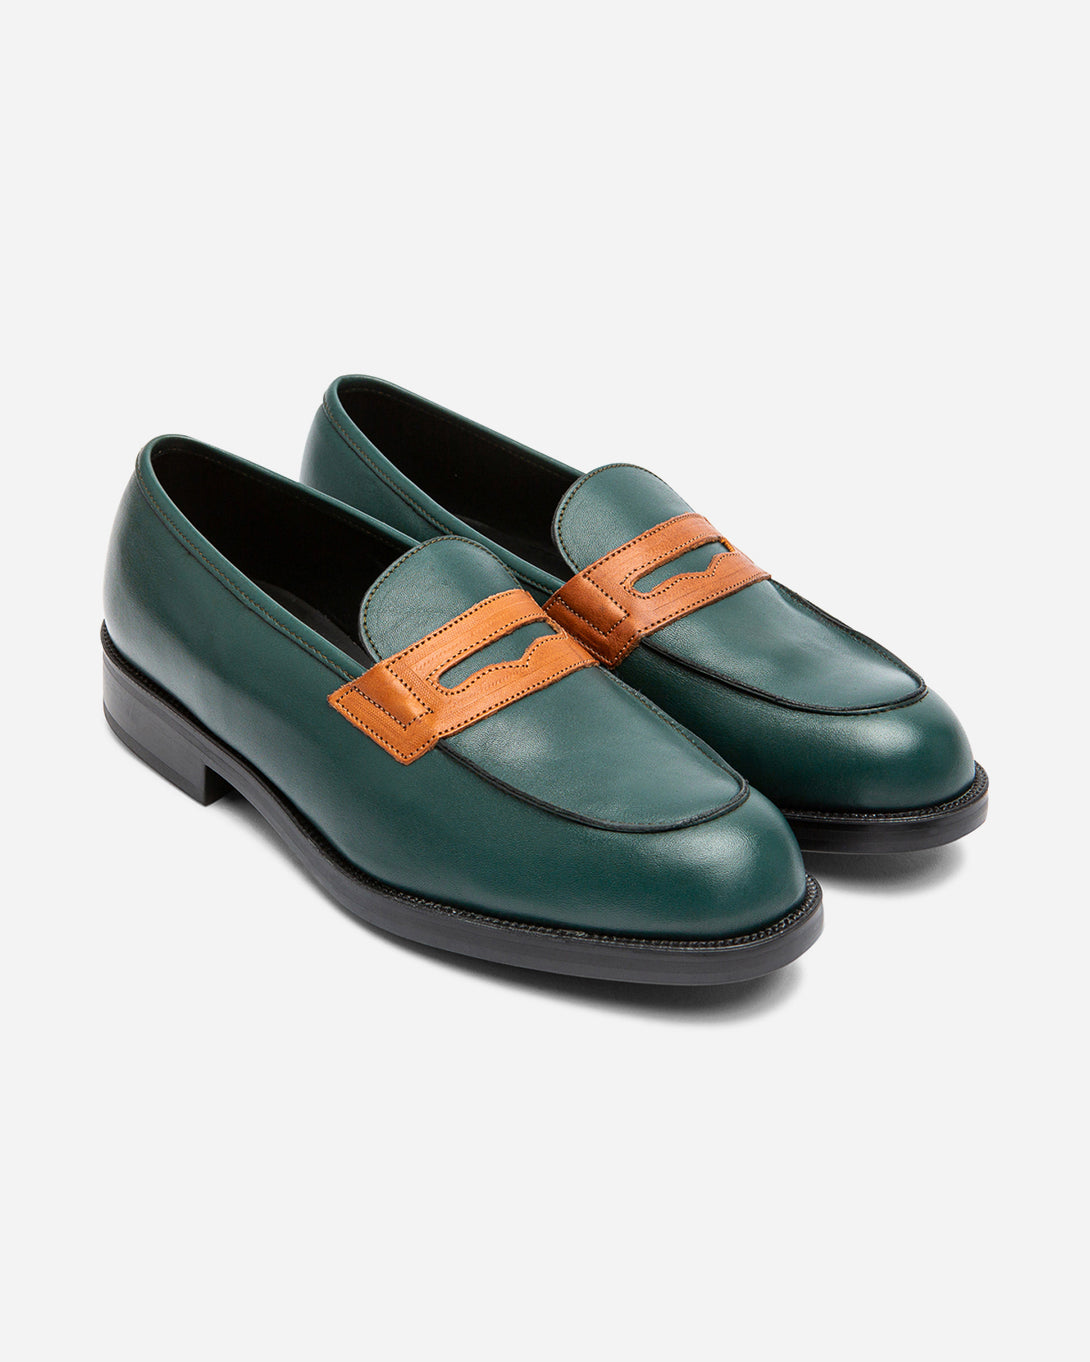 ons mens clothing kleman dalior 2 leather loafers shoes VERT+COGNAC